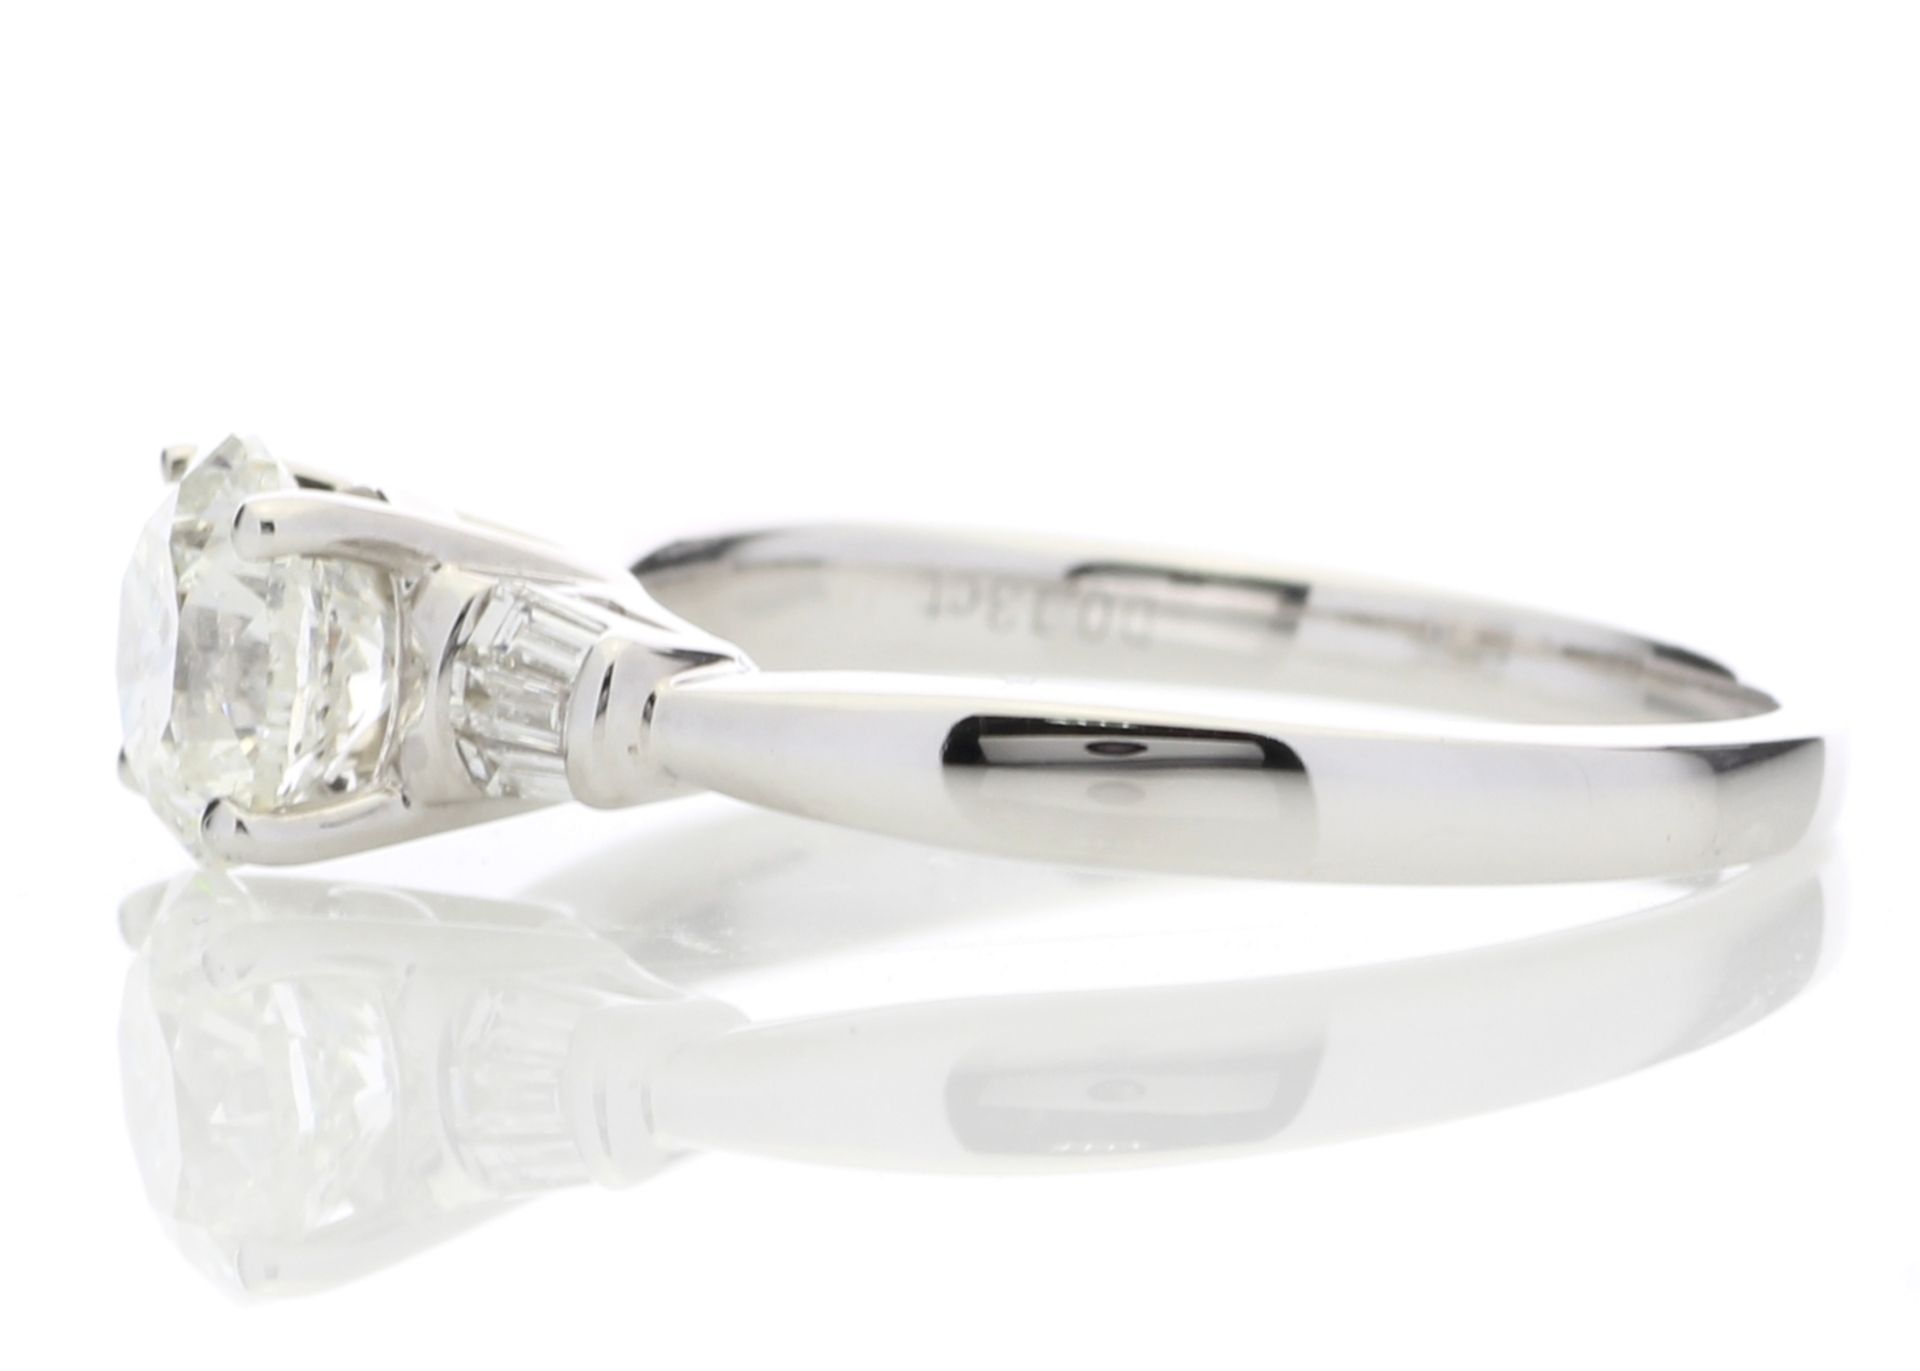 18ct White Gold Single Stone Diamond Ring With Baguette (1.02) 1.15 - Image 2 of 4